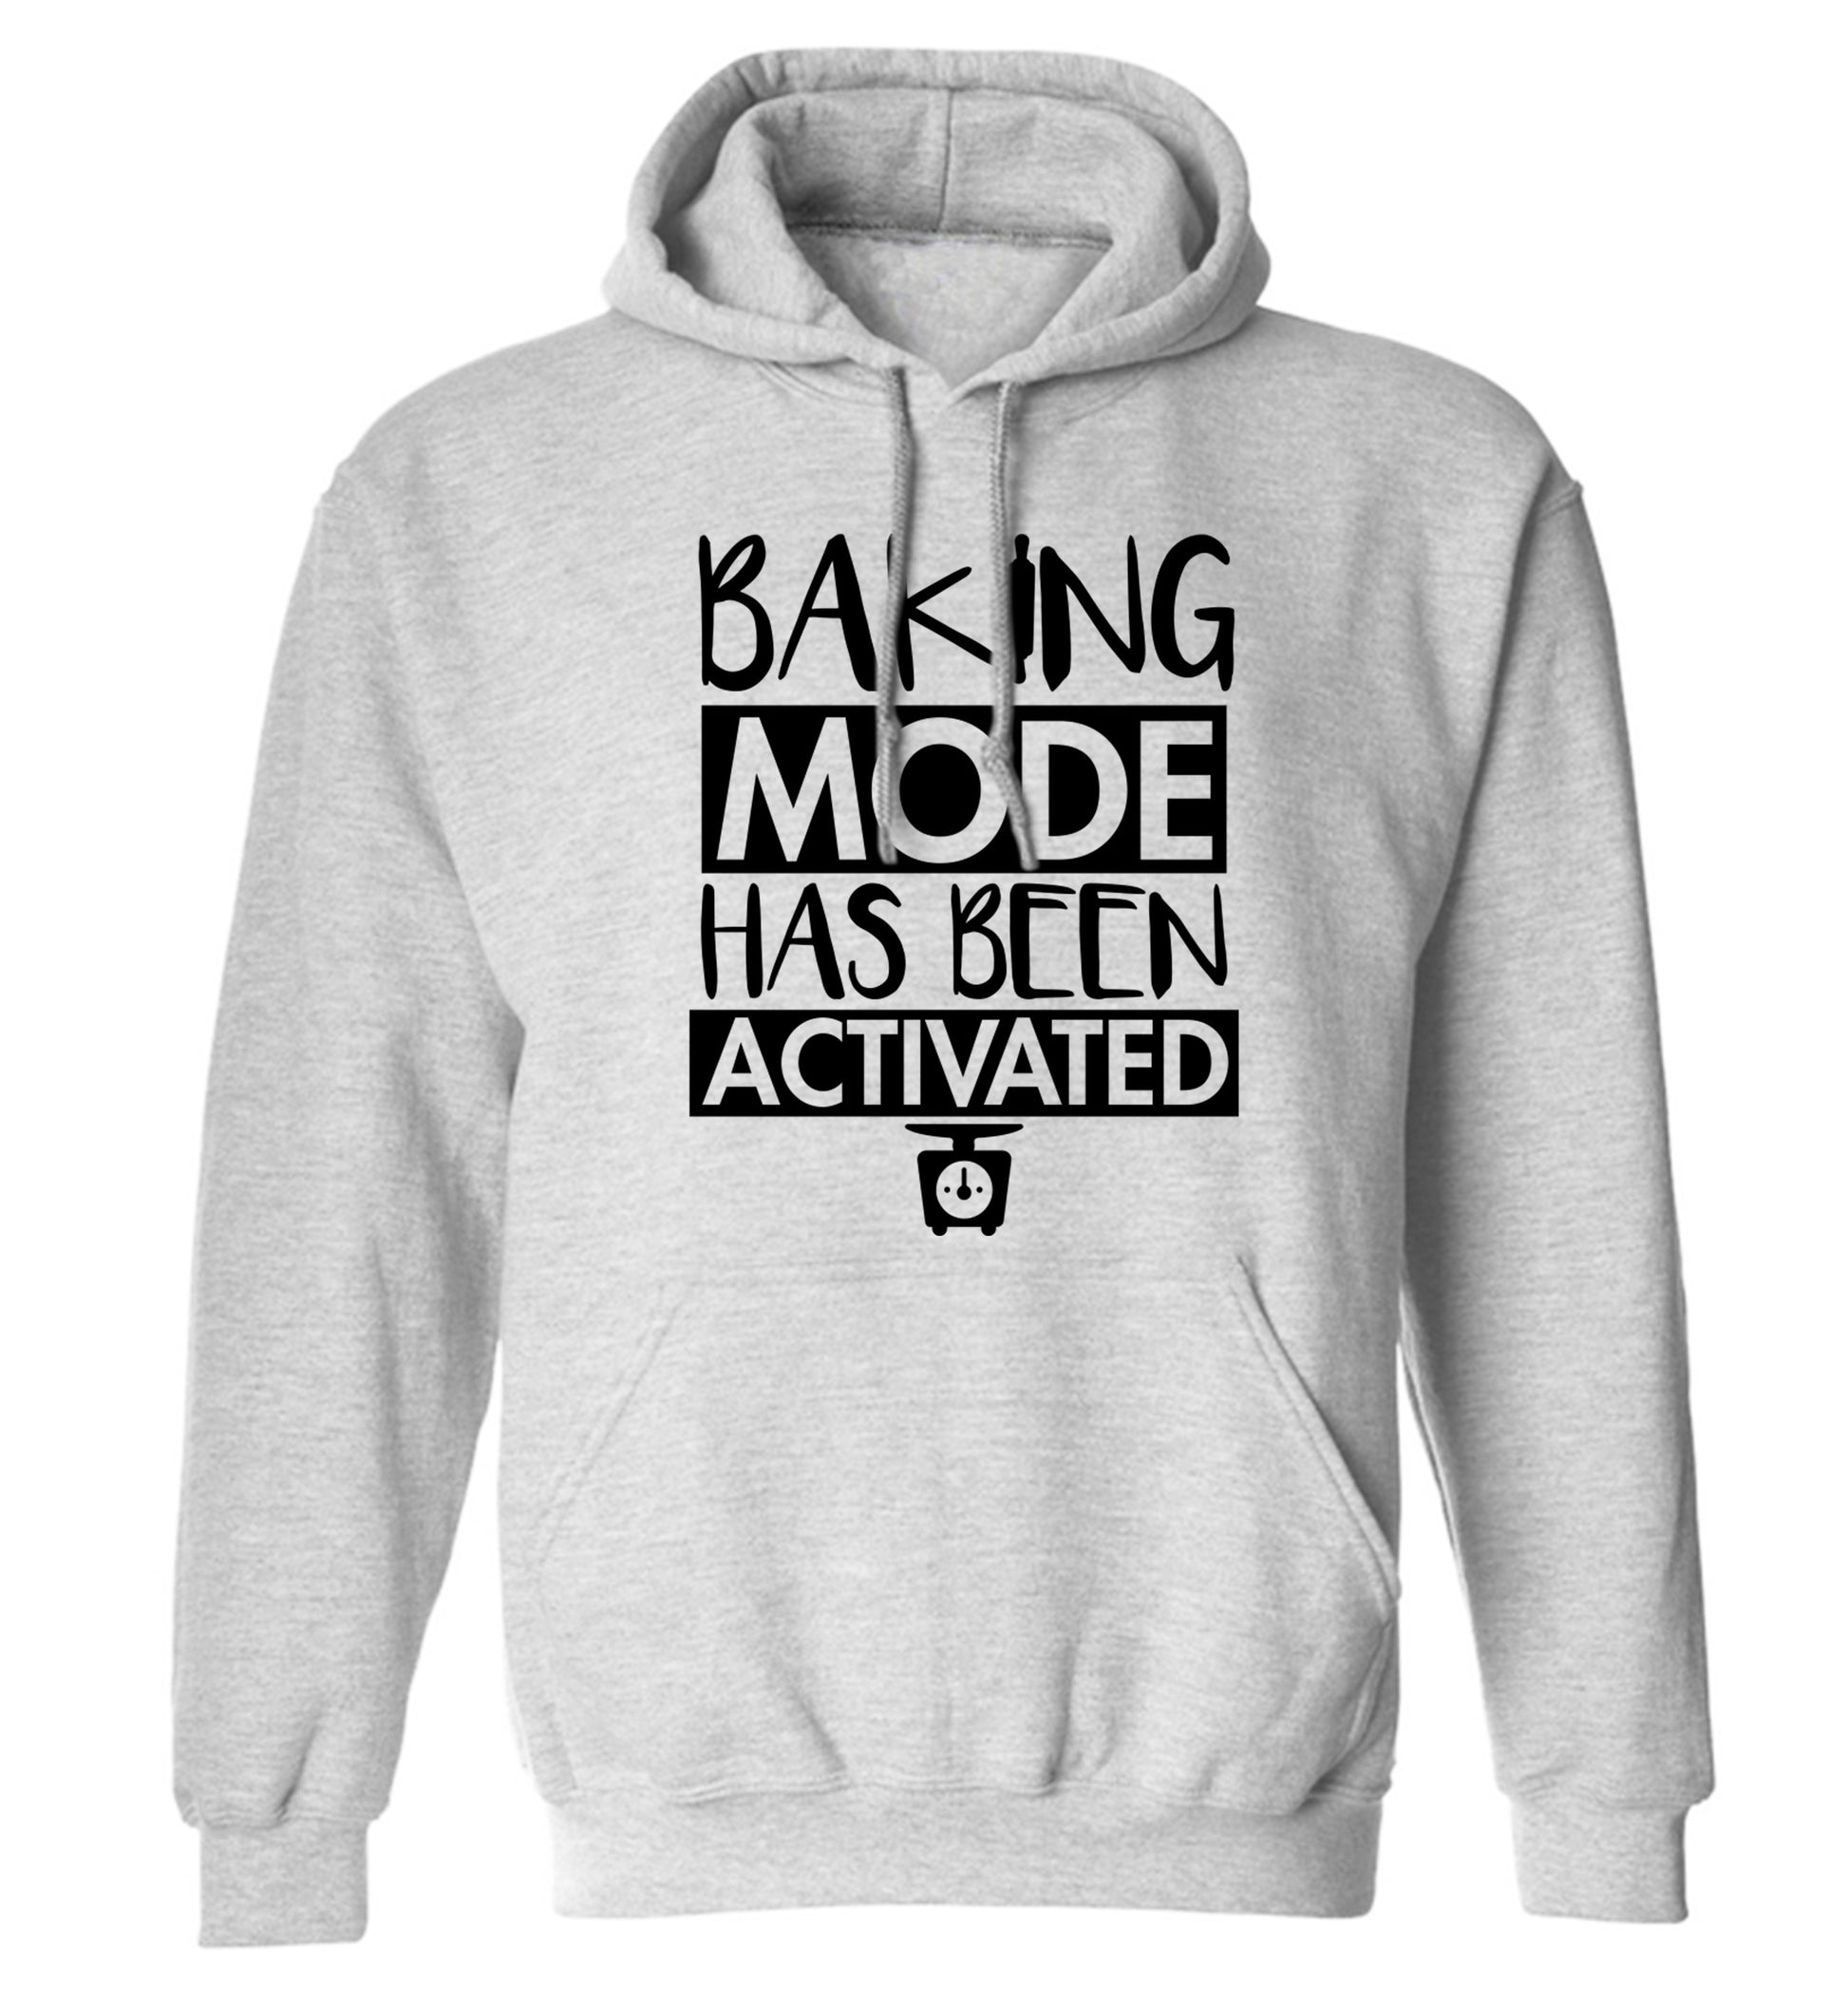 Baking mode has been activated adults unisex grey hoodie 2XL